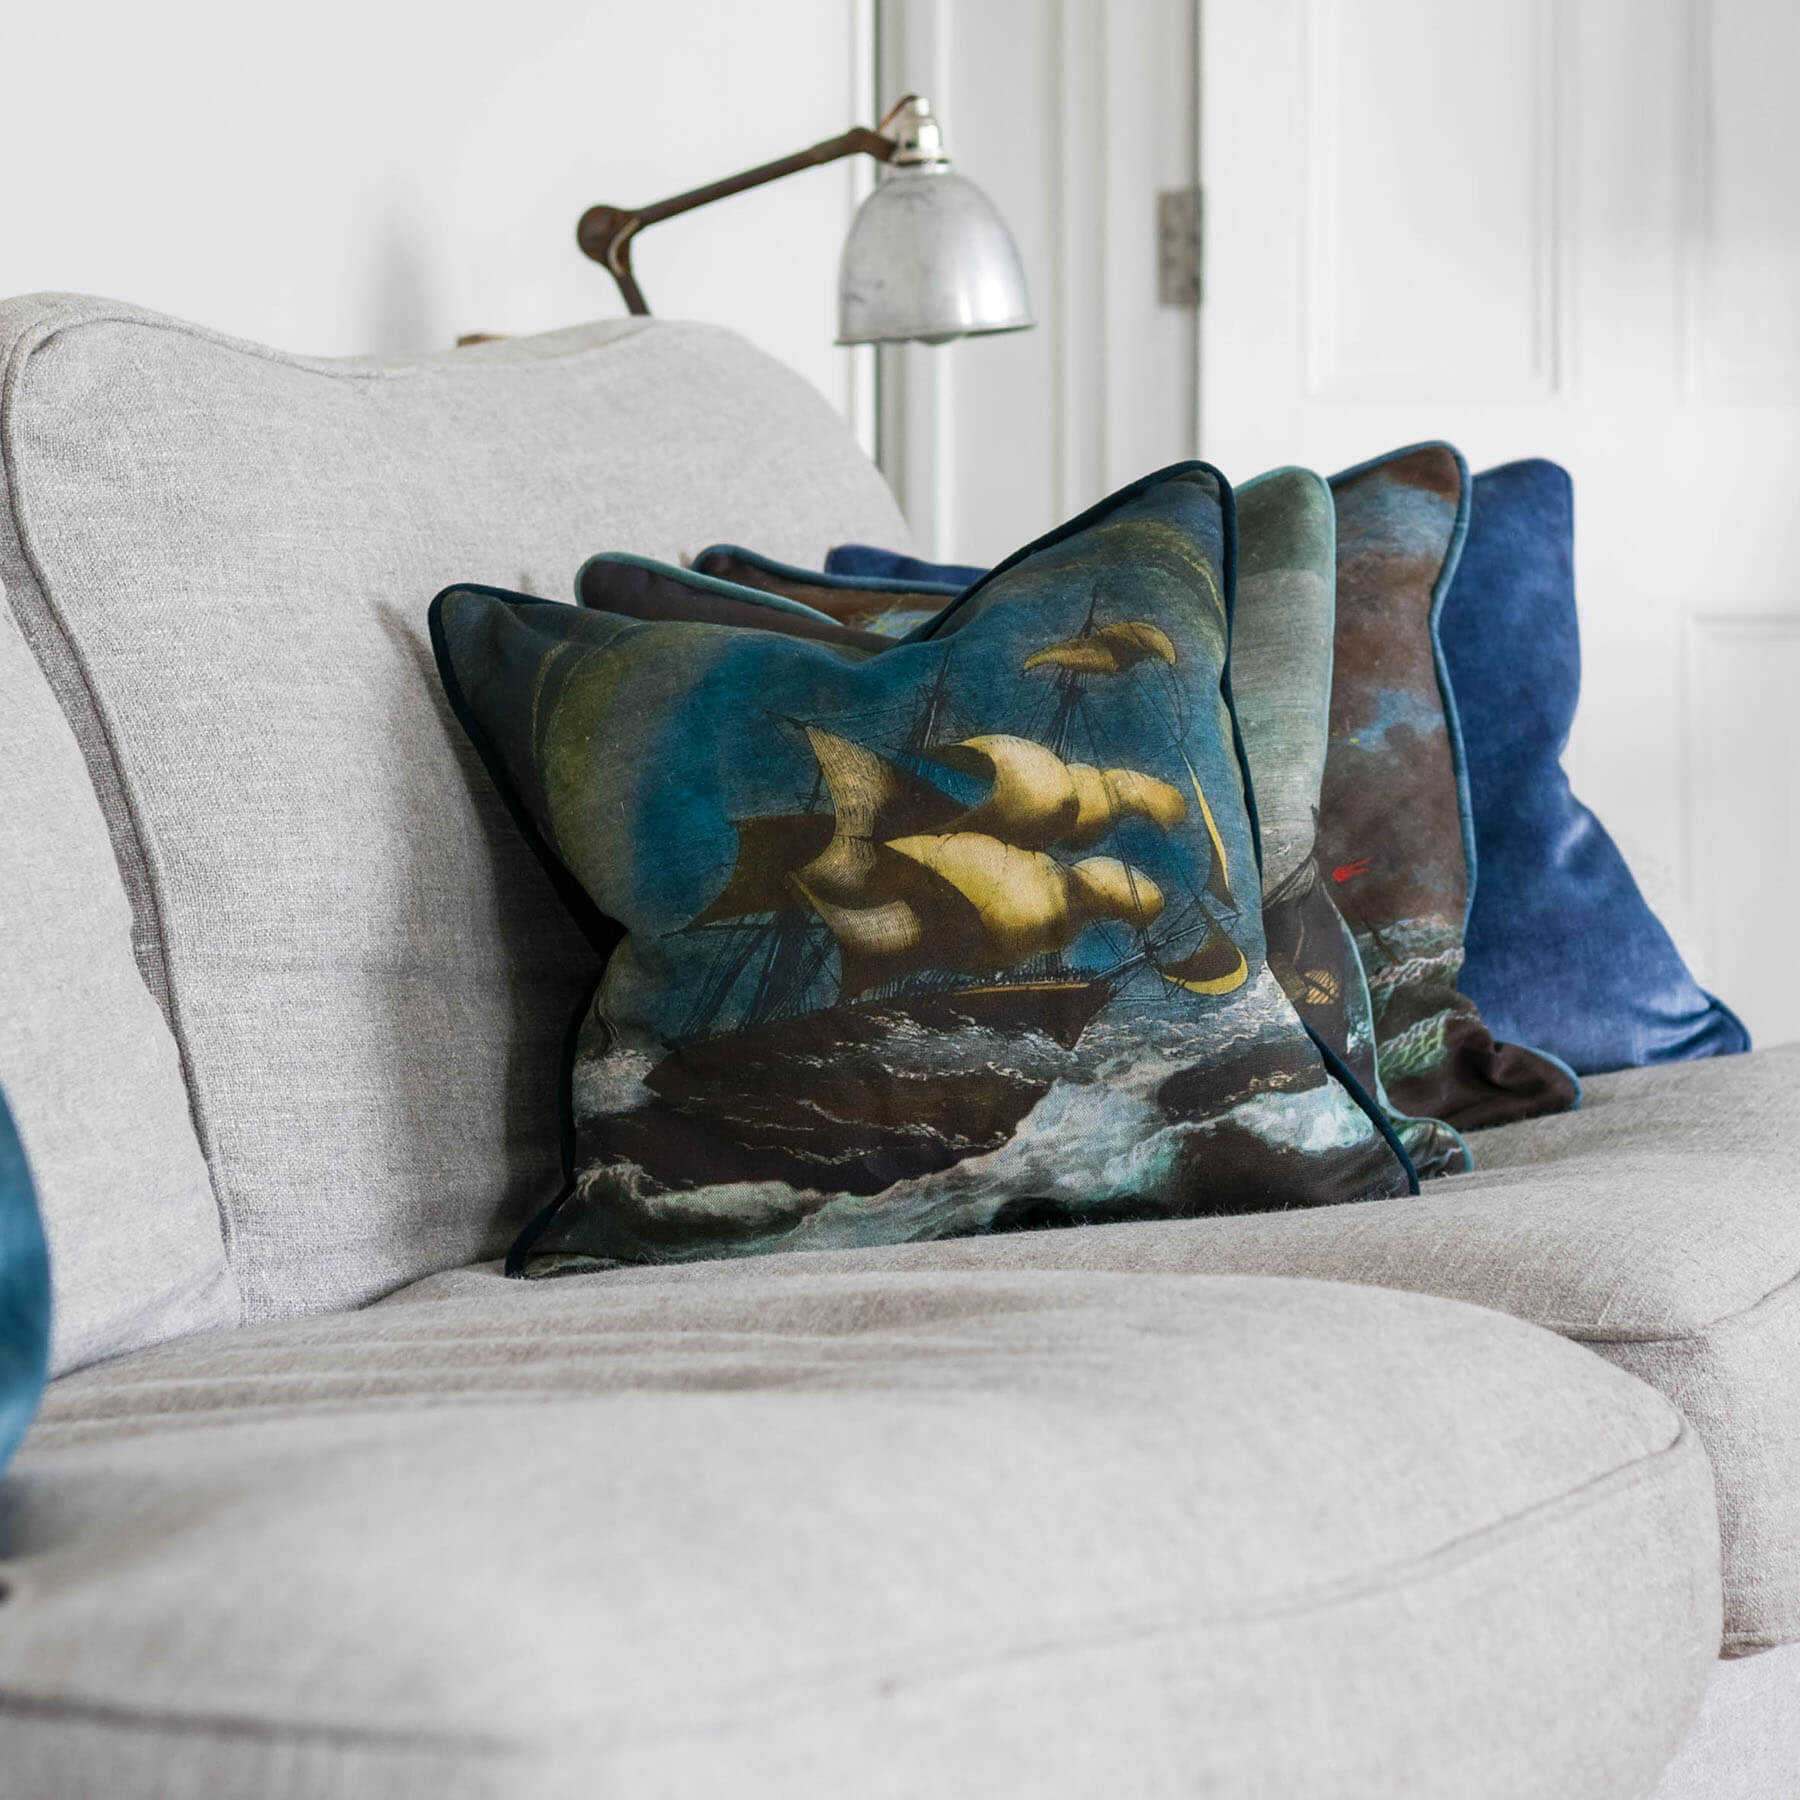 Tornado Cushion Cover ,scene of a billowing sailing ship in rough waters on a sofa with other shipwreck design ciushions.